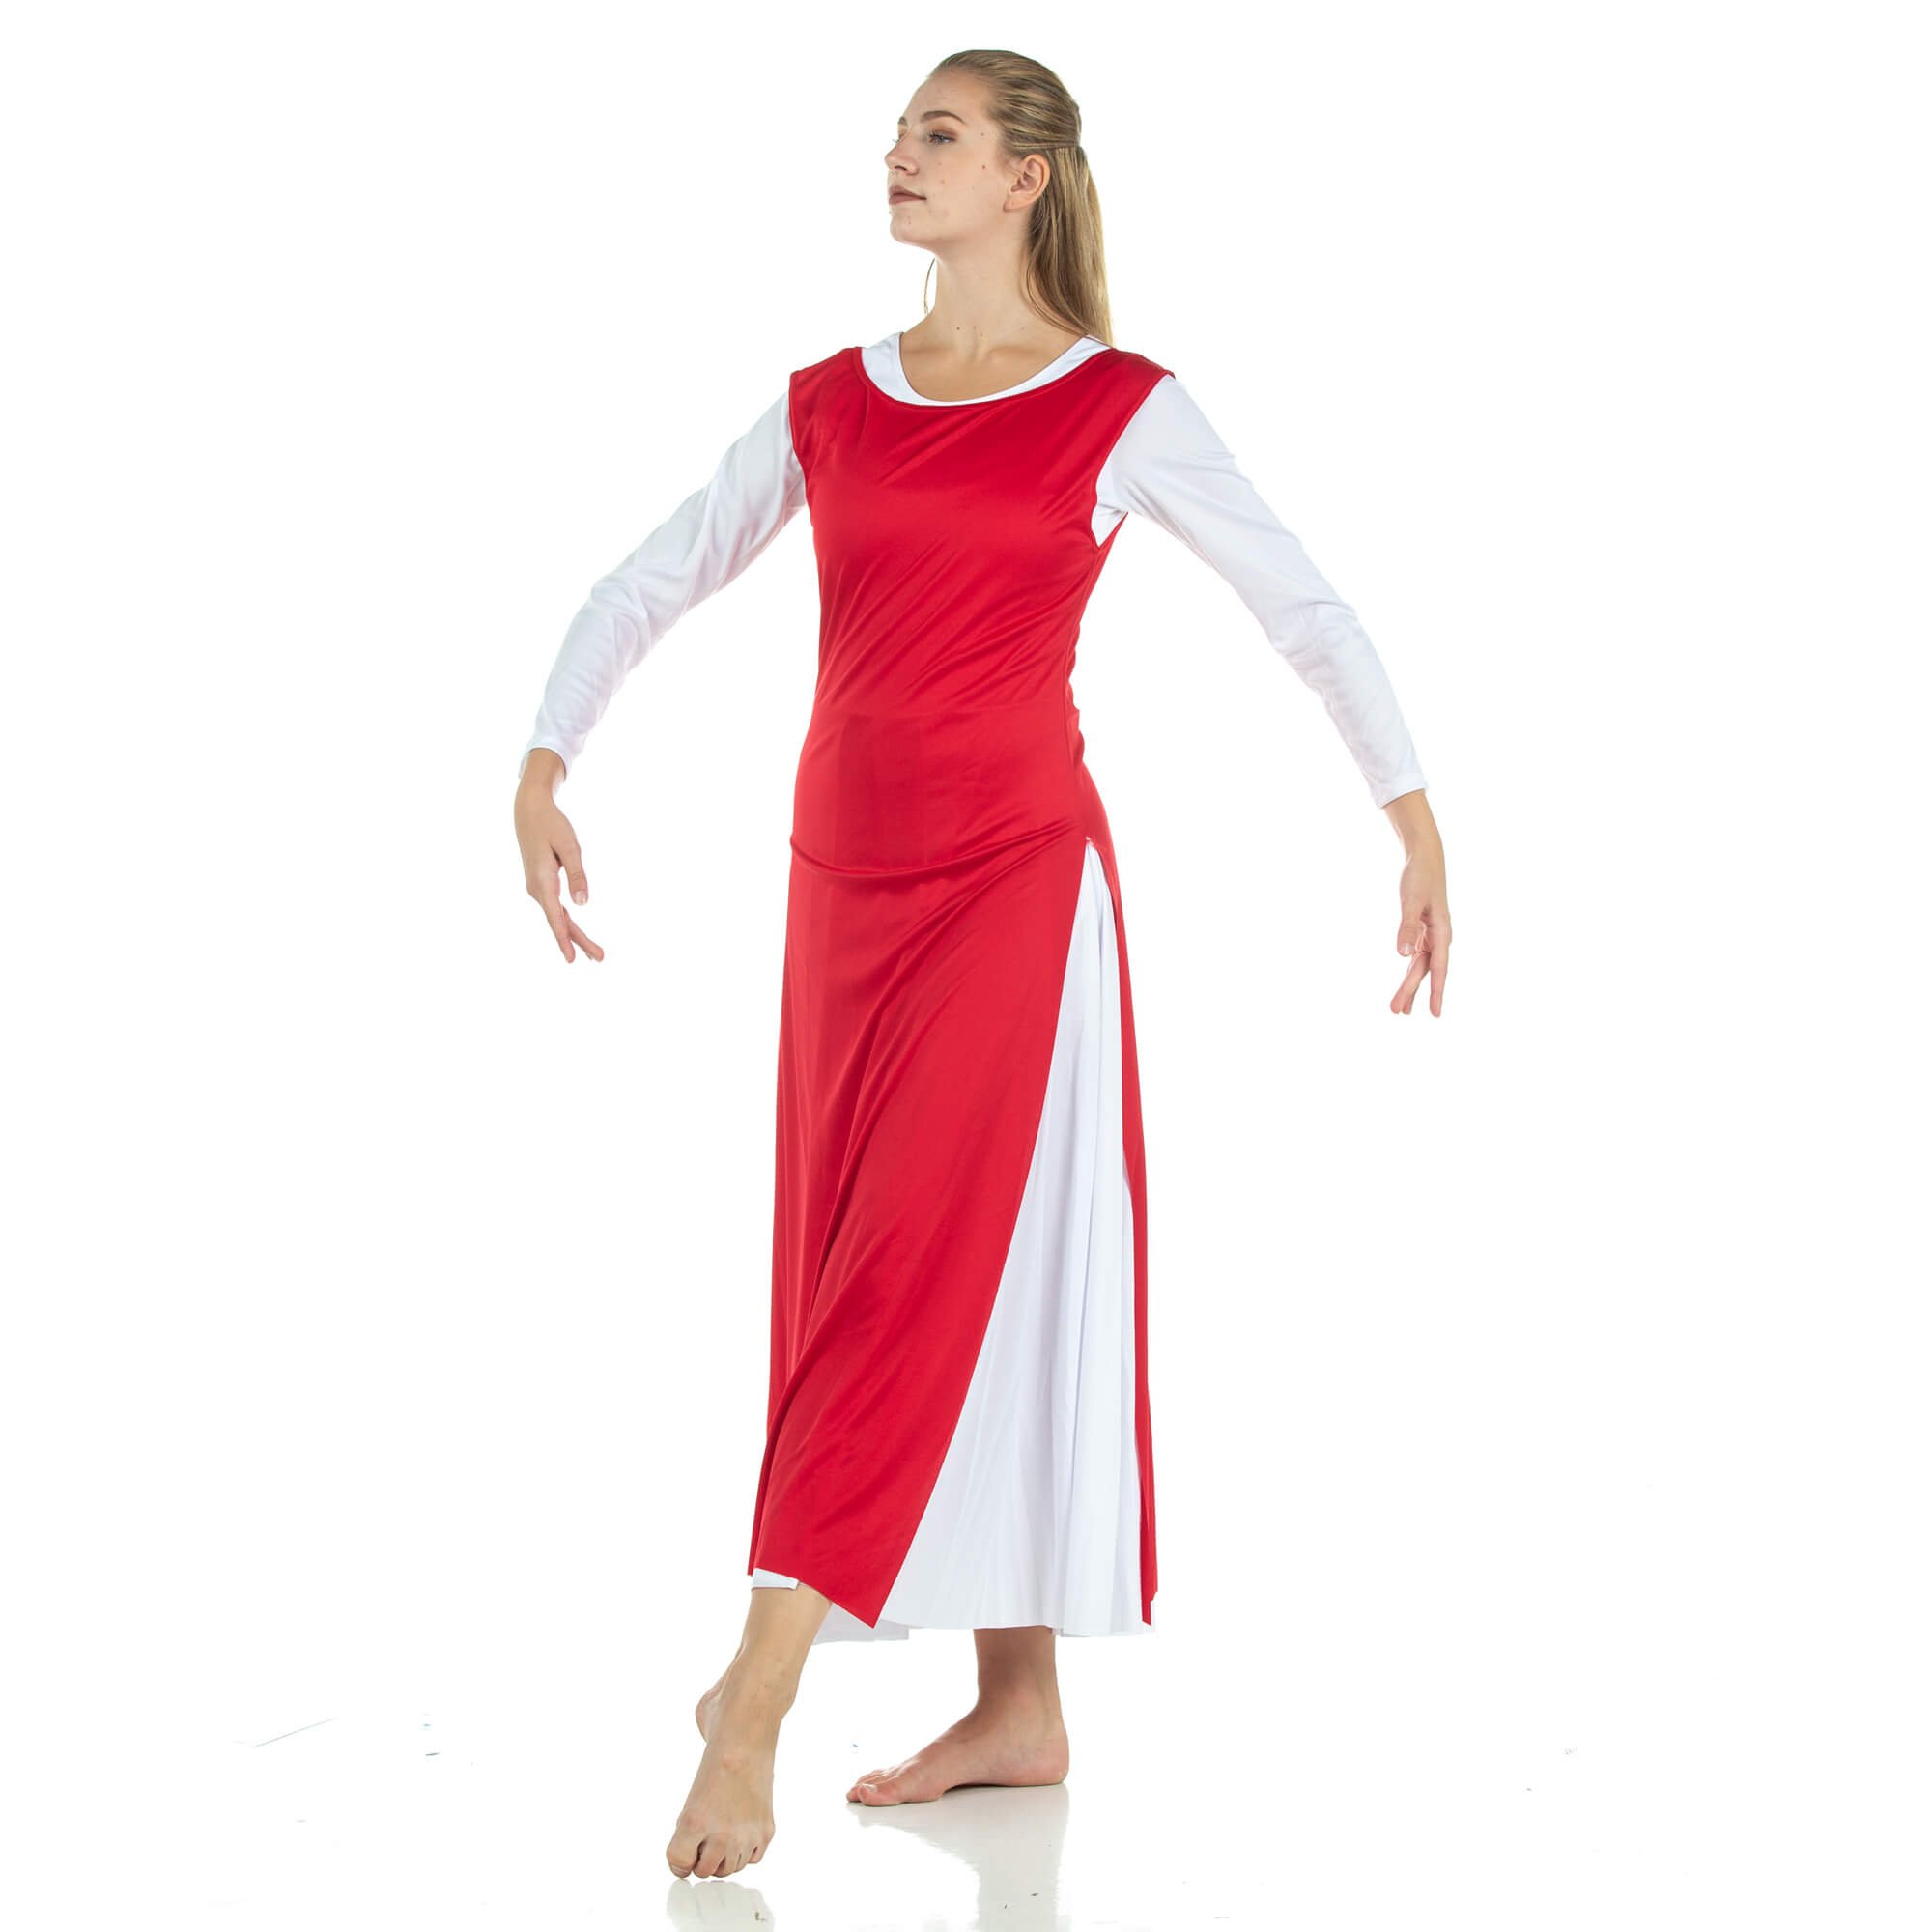 Tunic Worship Dance with Side Slits (white dress not included) - Click Image to Close